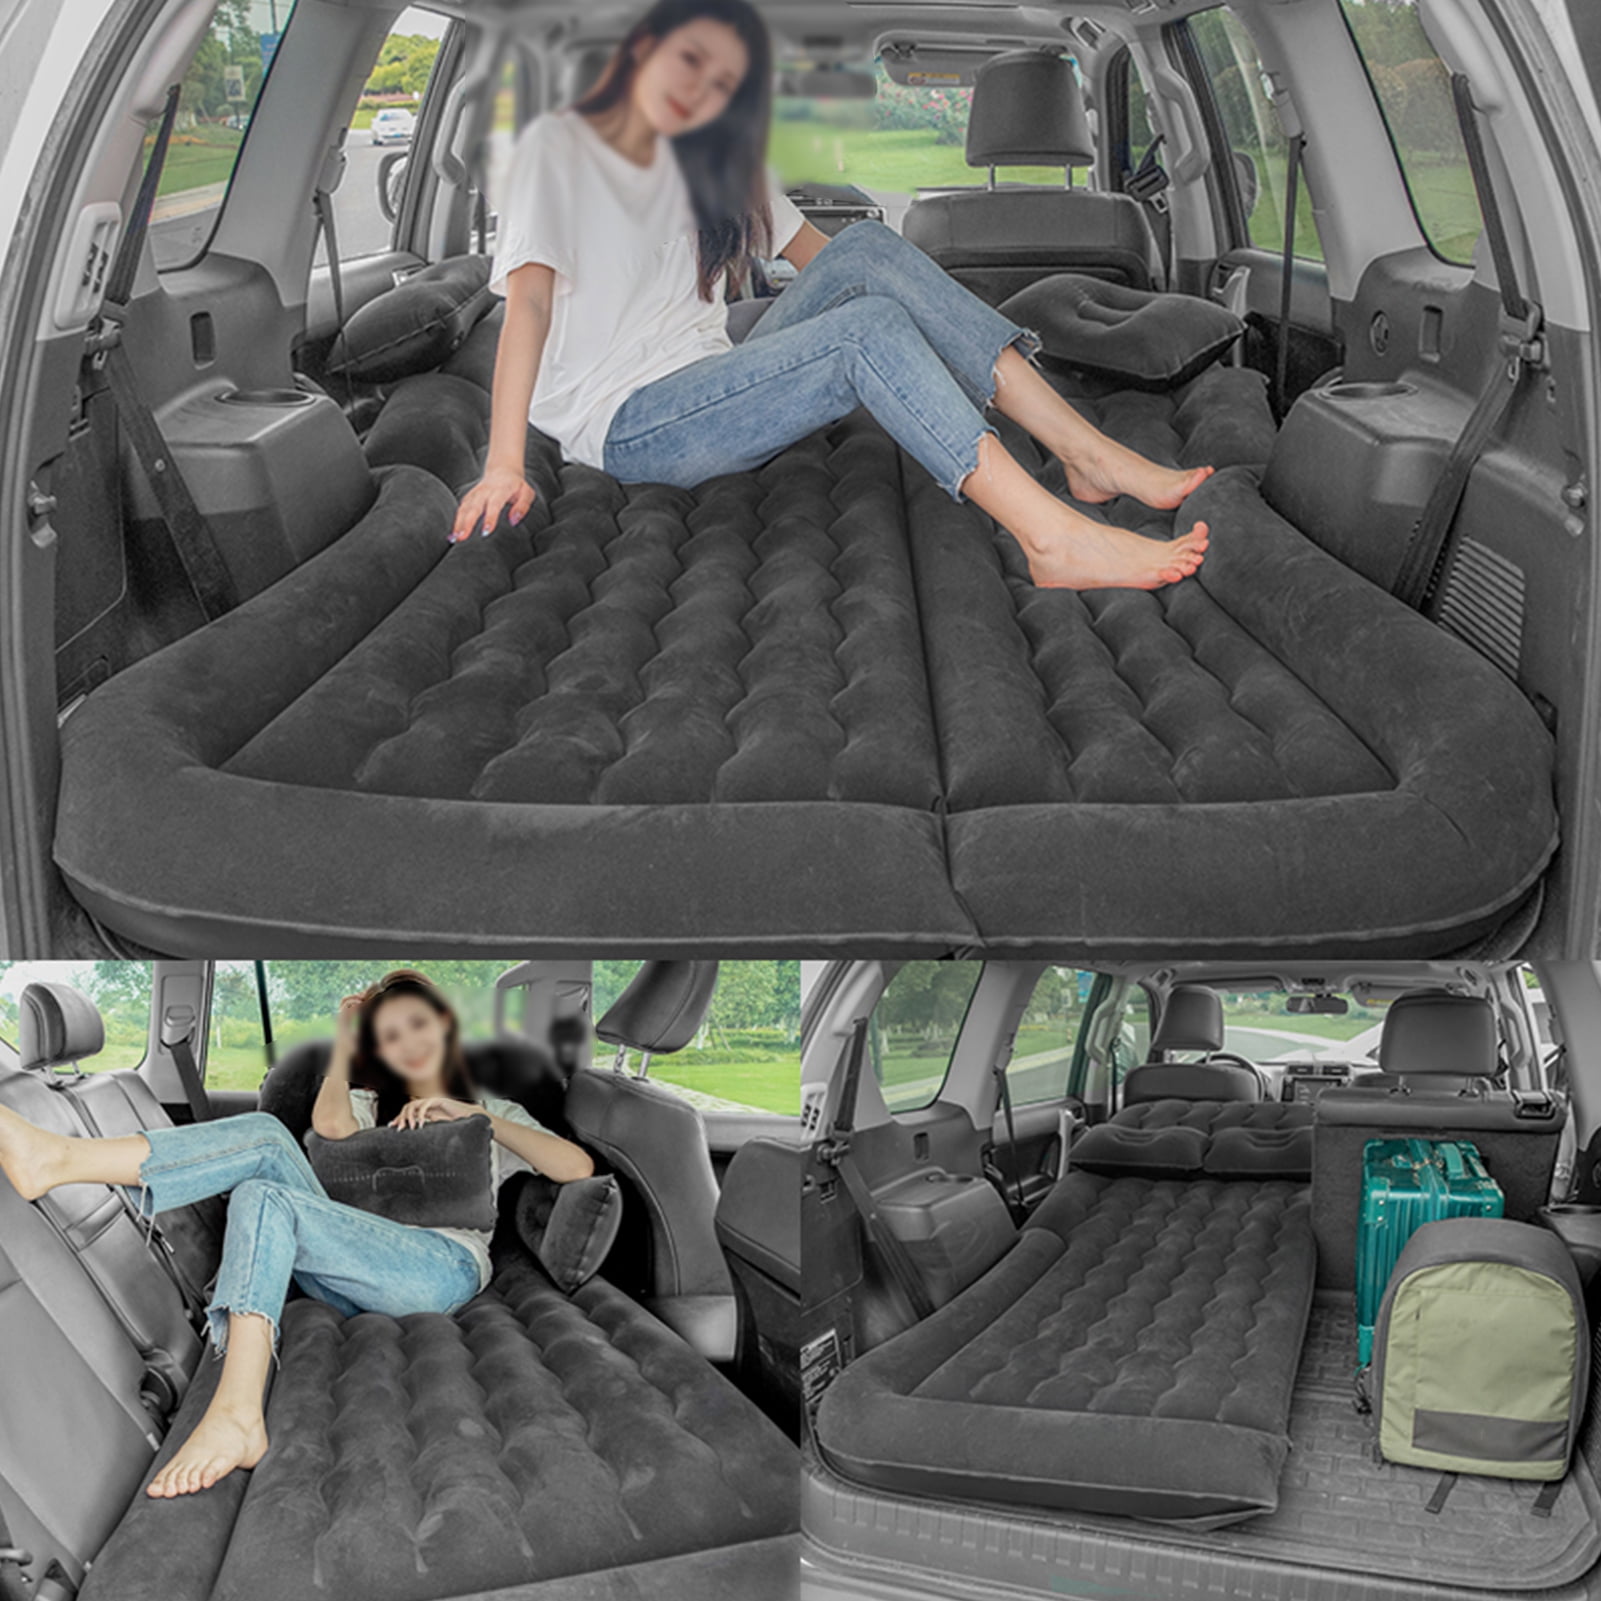 Brrnoo Car Air Mattress Vehicle Inflatable Thickened Travel Bed Sleeping  Pad Camping Accessory 